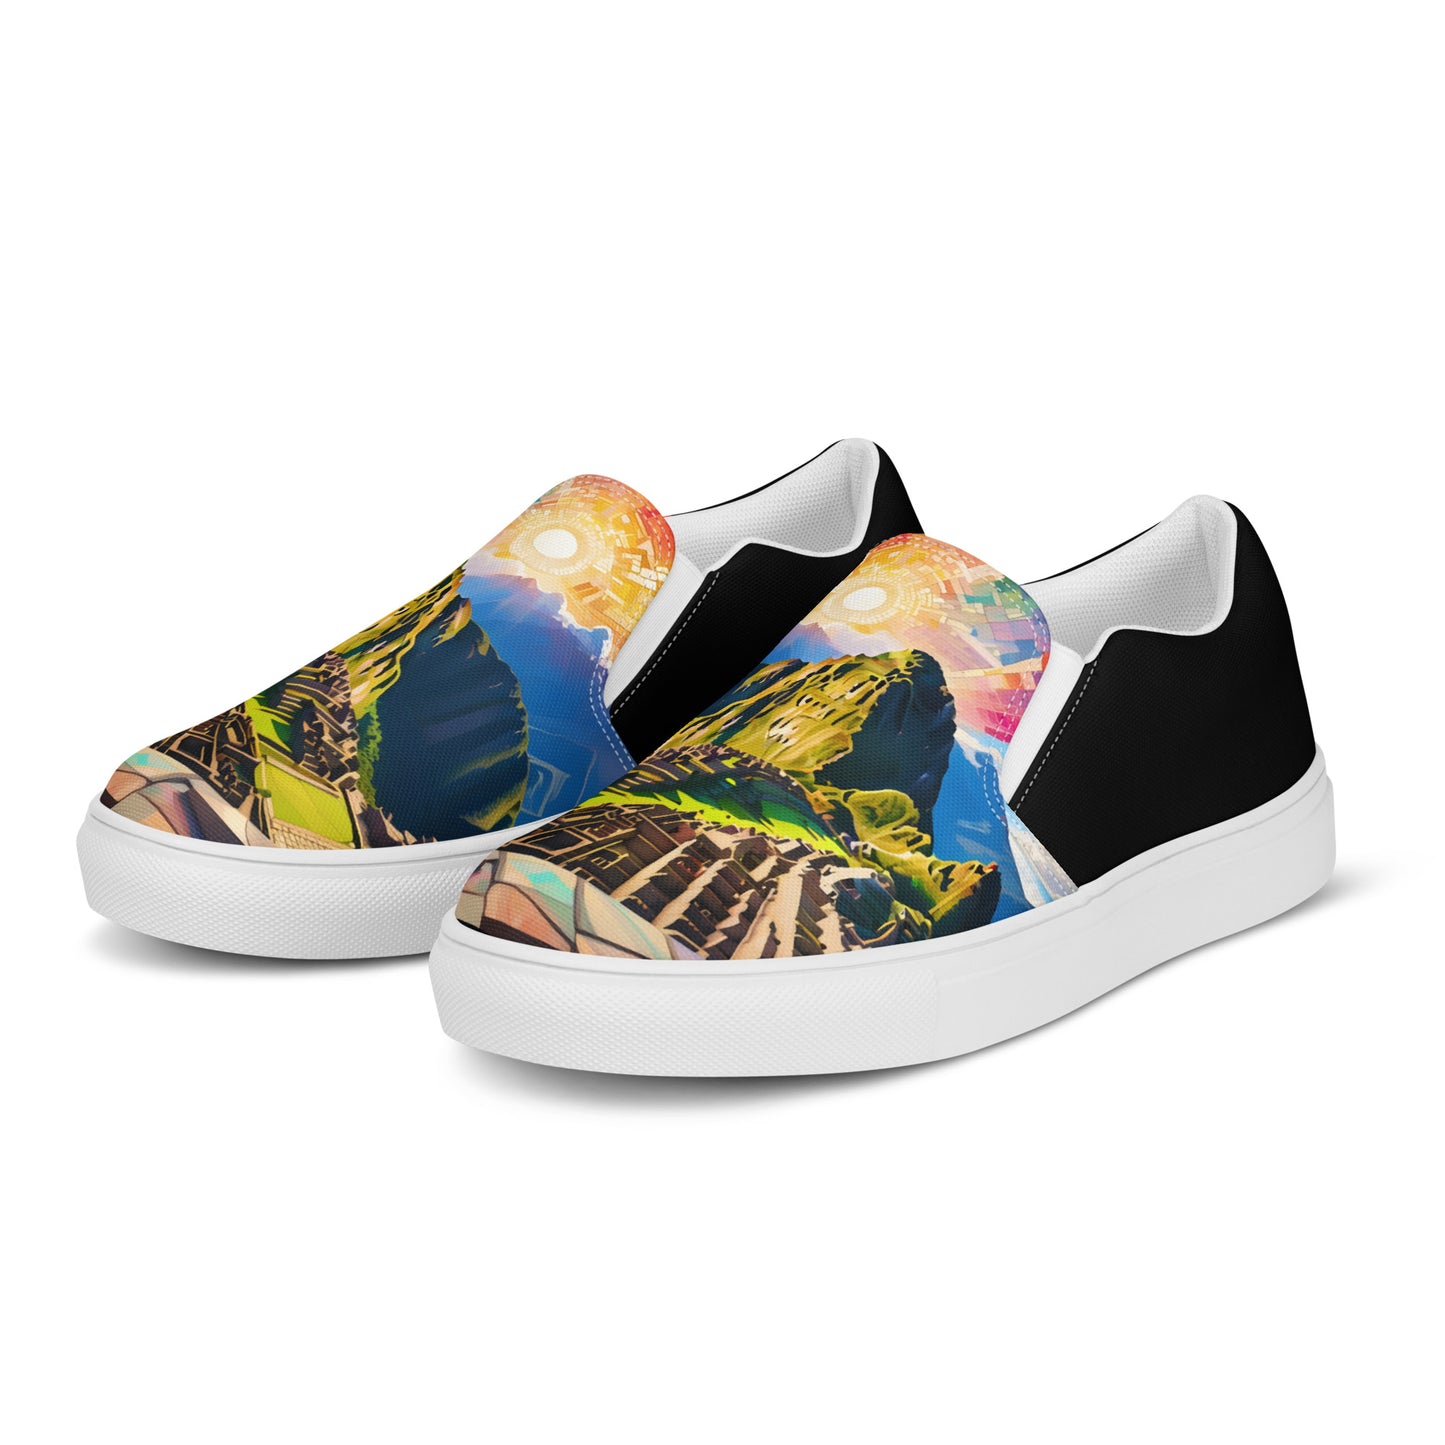 Machu Picchu - Stained glass - Women - Black - Slip-on shoes